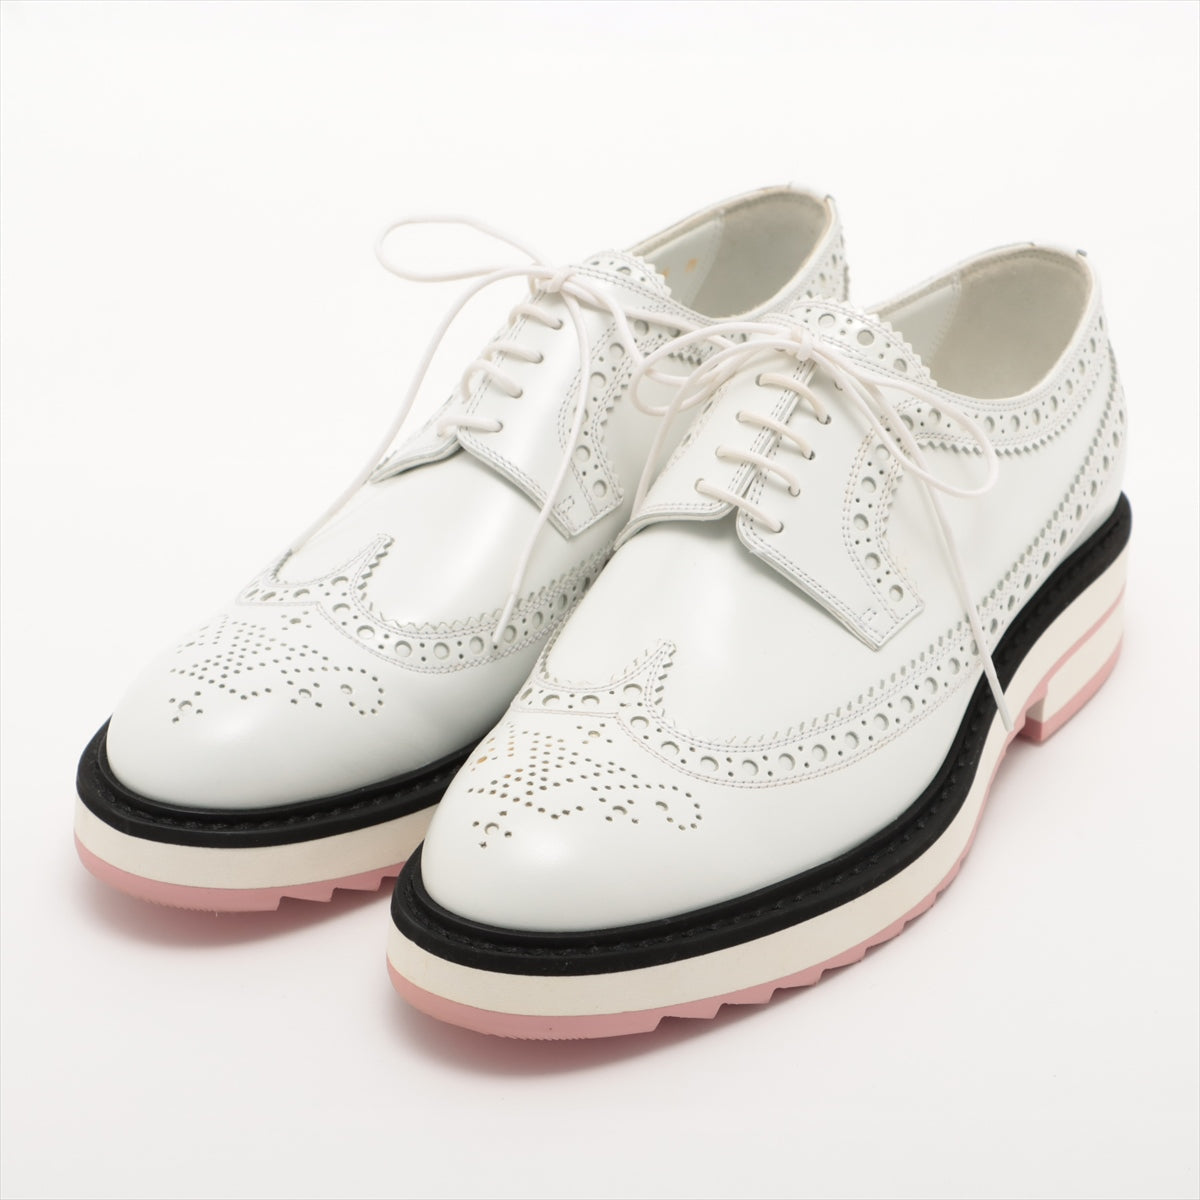 Louis Vuitton 15 years Leather Leather shoes 36 Ladies' White SC0195 LV Logo Is there a replacement string